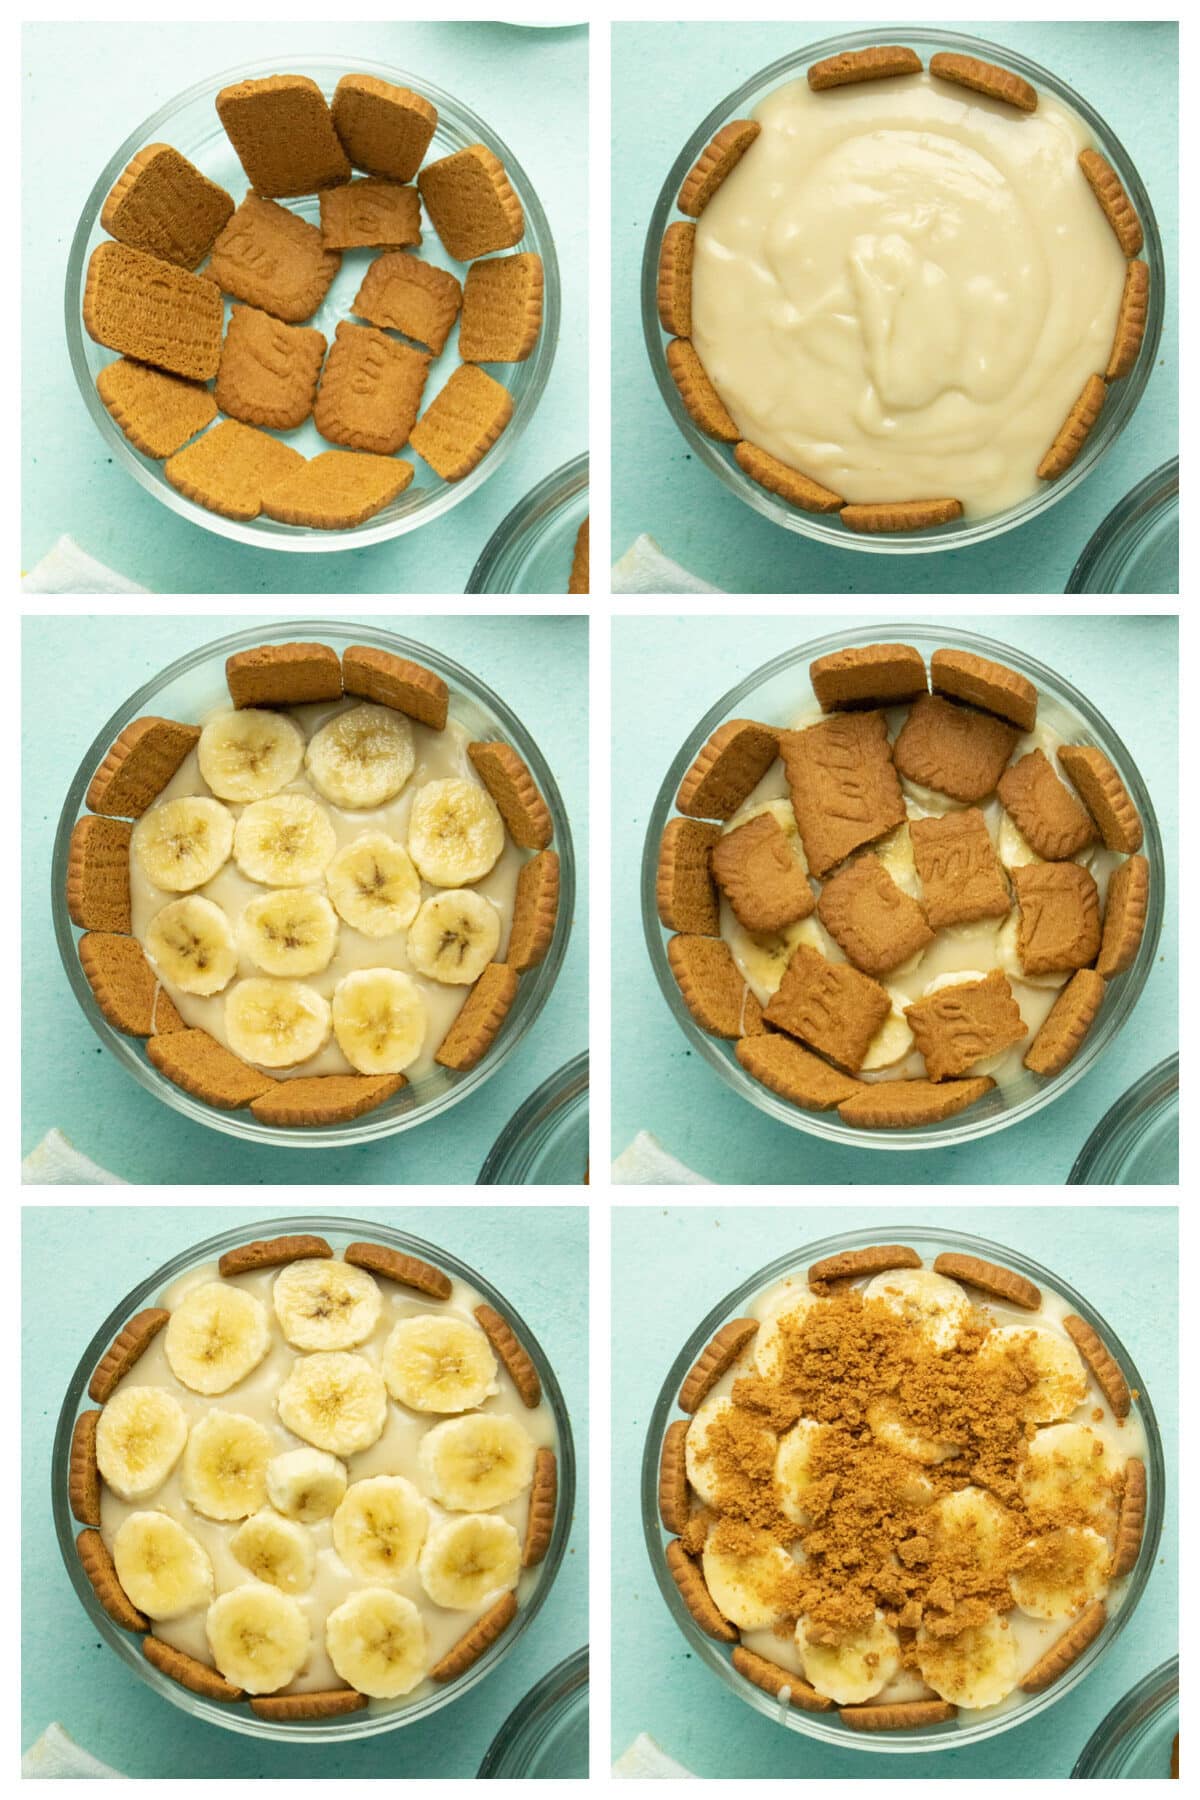 image collage showing: cookies lining the bowl, pudding layered on, banana slices layered on top, cookies layered on top, more bananas, and crumbled Biscoff cookies topping off the pudding